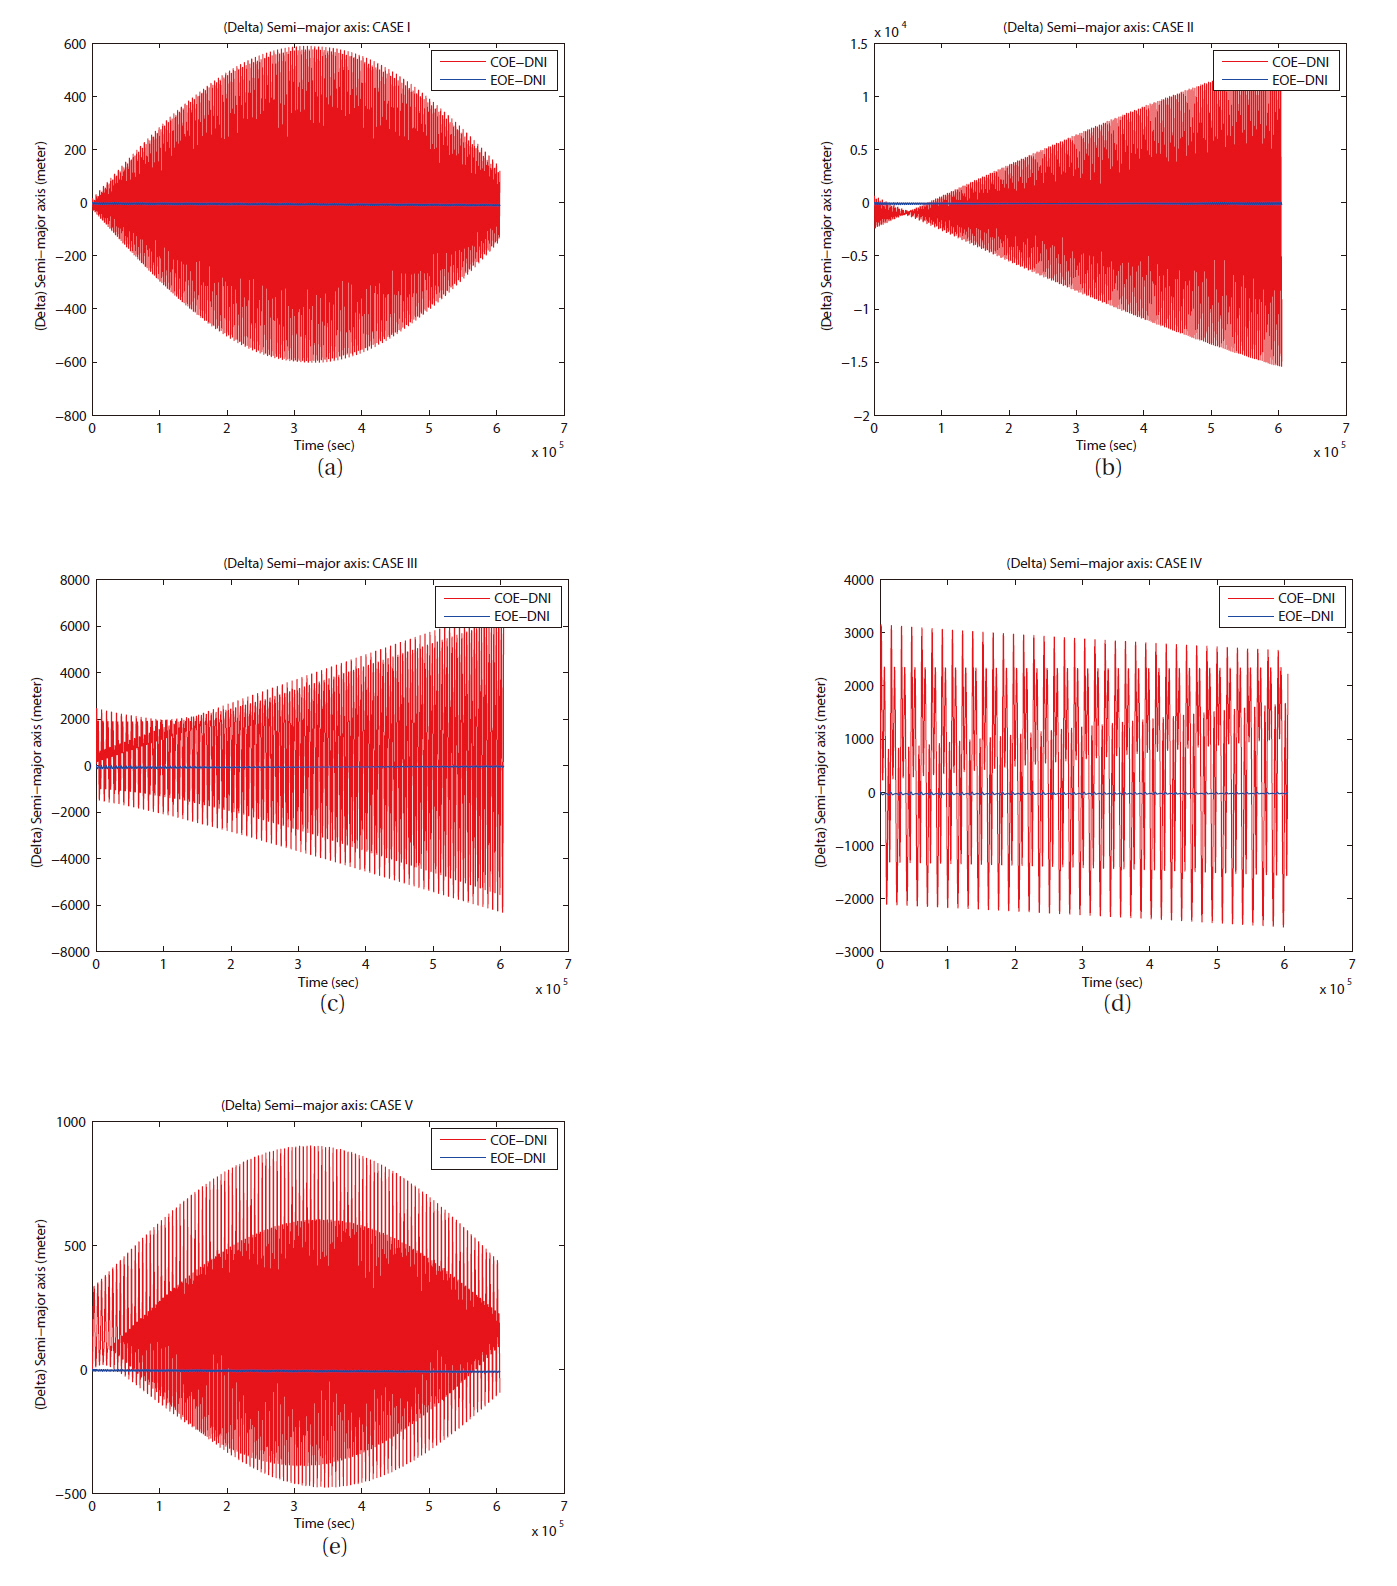 The differences in semi-major axes of two semi-analytical solutions from direct numerical integration (DNI) result with the J2 perturbation for all cases in seven days. Red line by COE LPE-DNI blue line by EOE LPE-DNI.